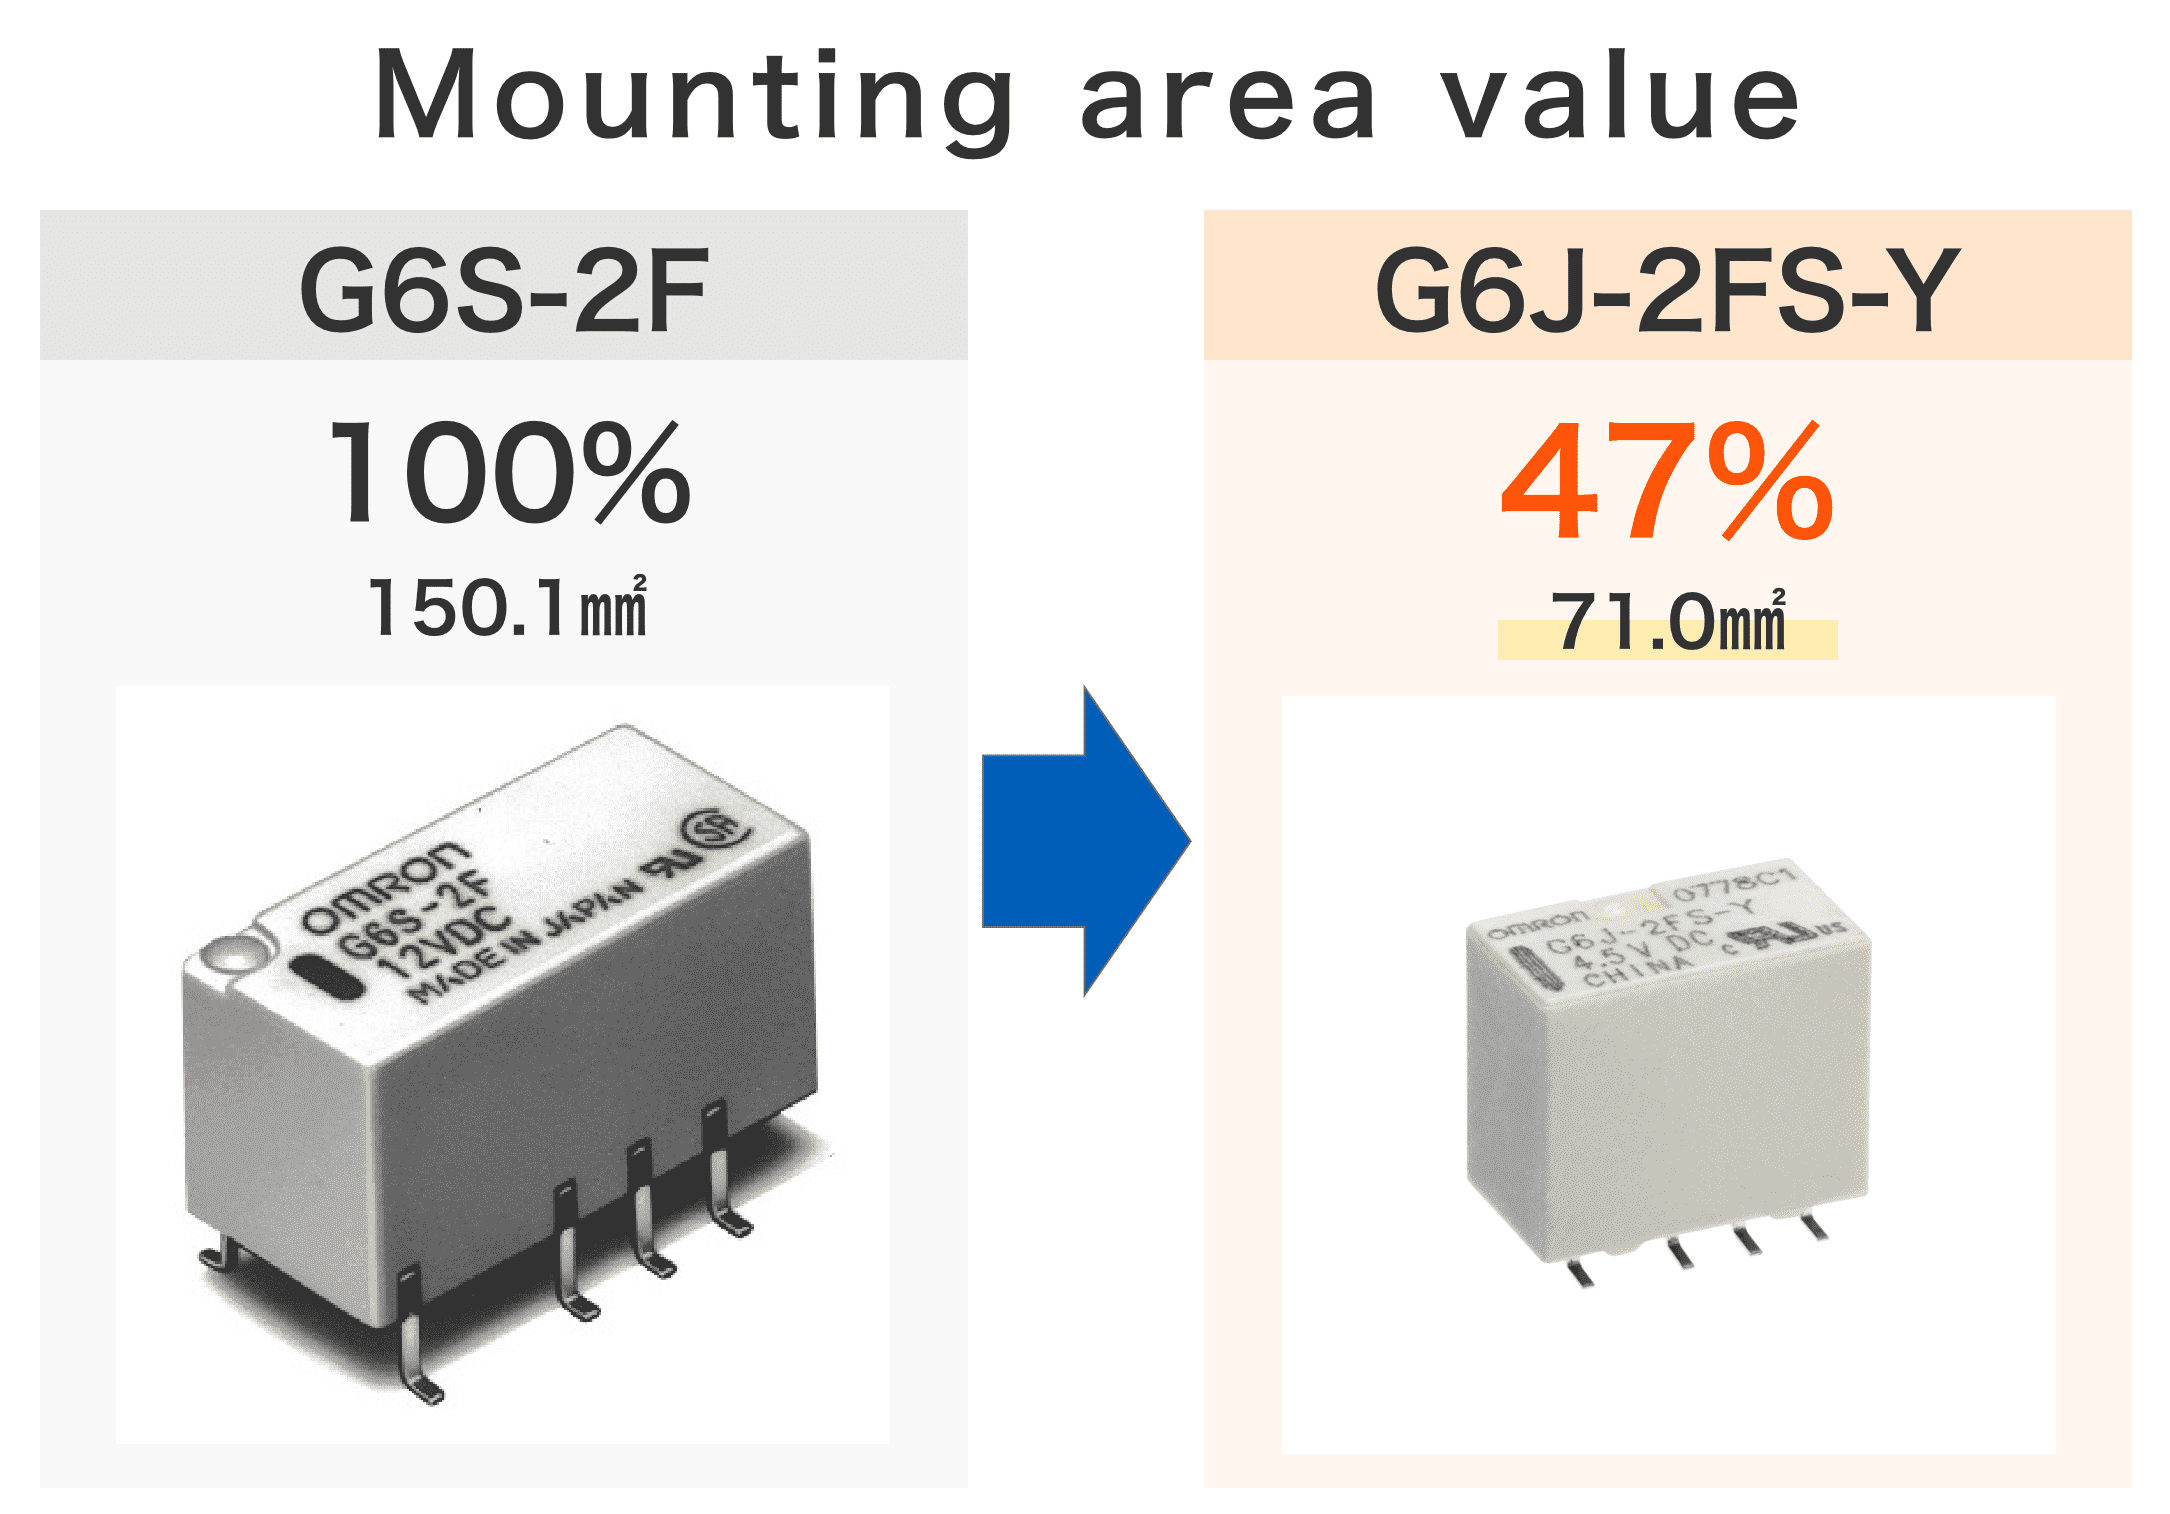 Mounting area value : G6S-2F 100% 150.1mm2 / G6J-2FS-Y 47% 71.0mm2